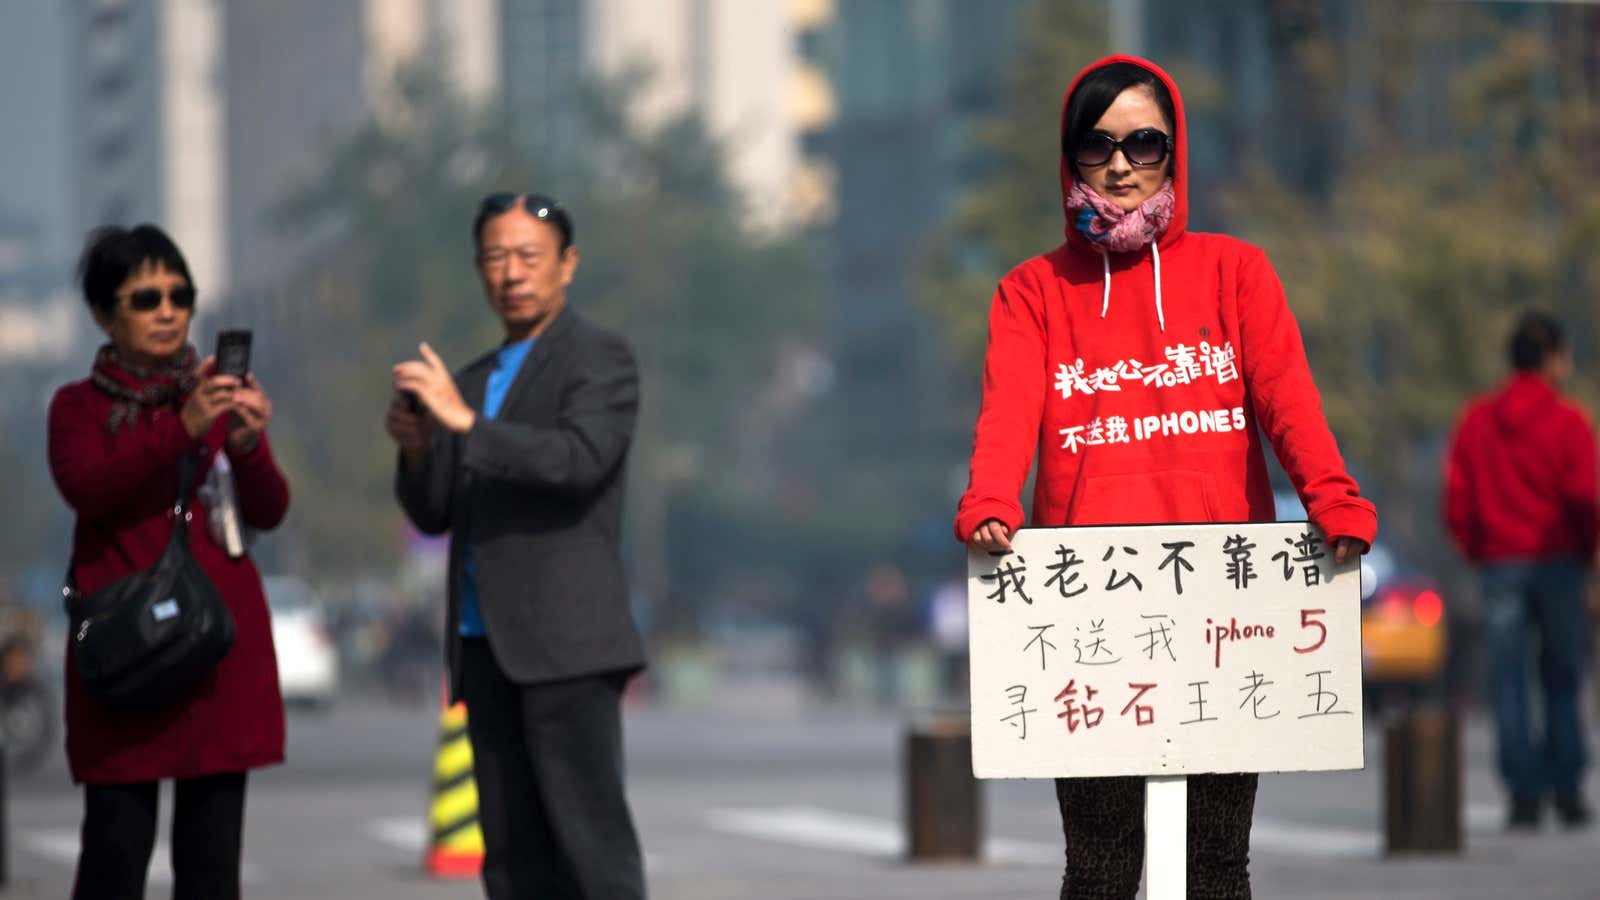 Near a new Apple store in Beijing, a woman holds a sign that says “My husband is not reliable, (he) doesn’t buy me an iPhone 5, (I’m) looking for a rich man”